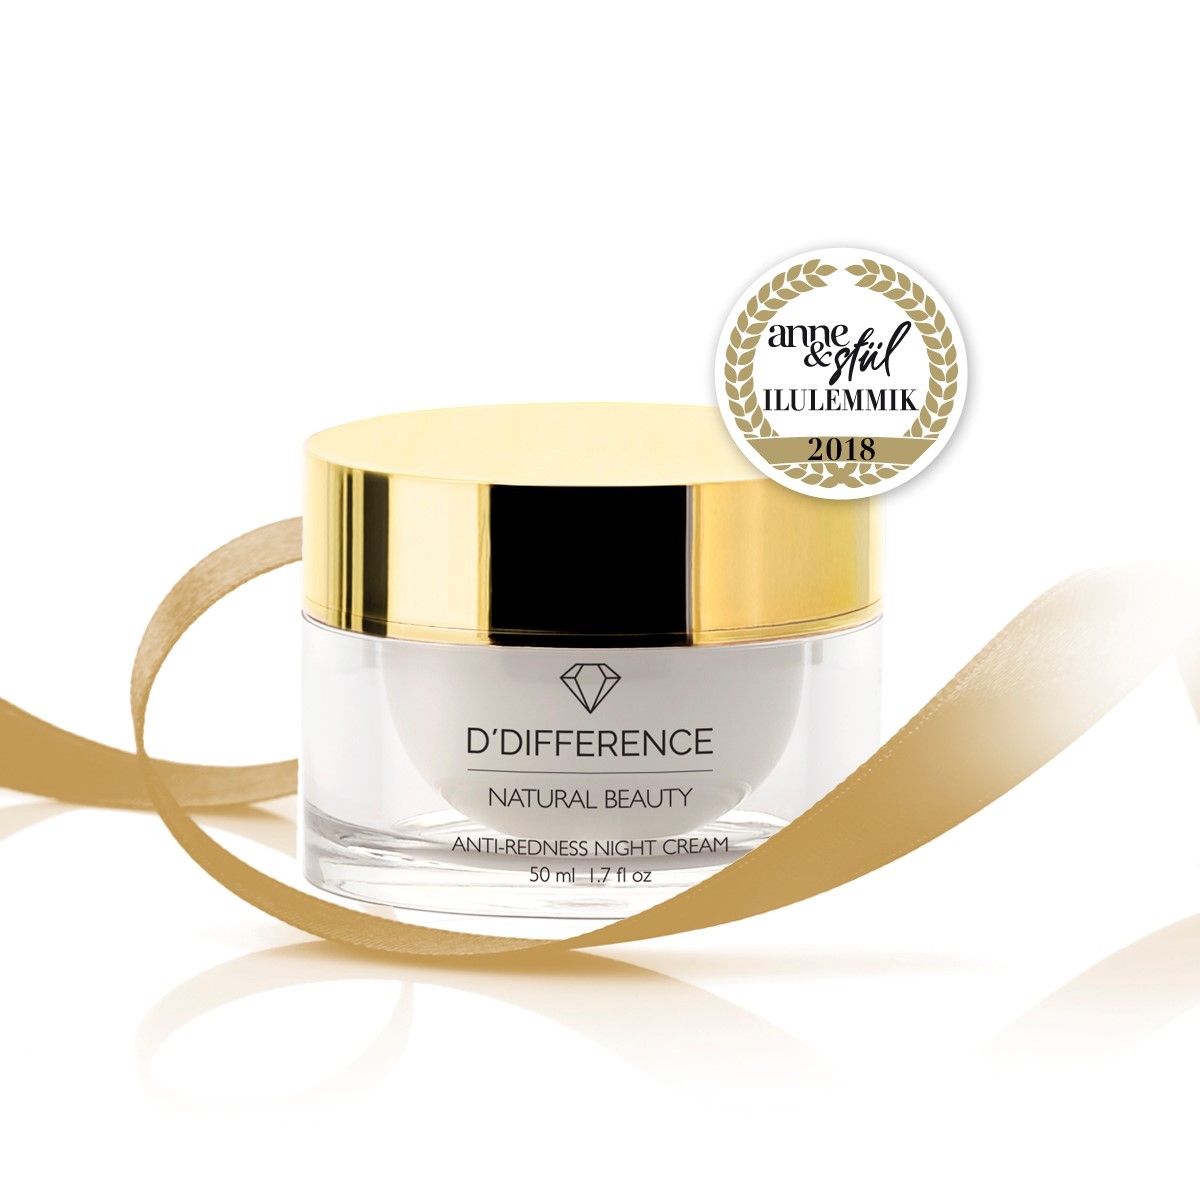 DDifference 4D Anti Redness